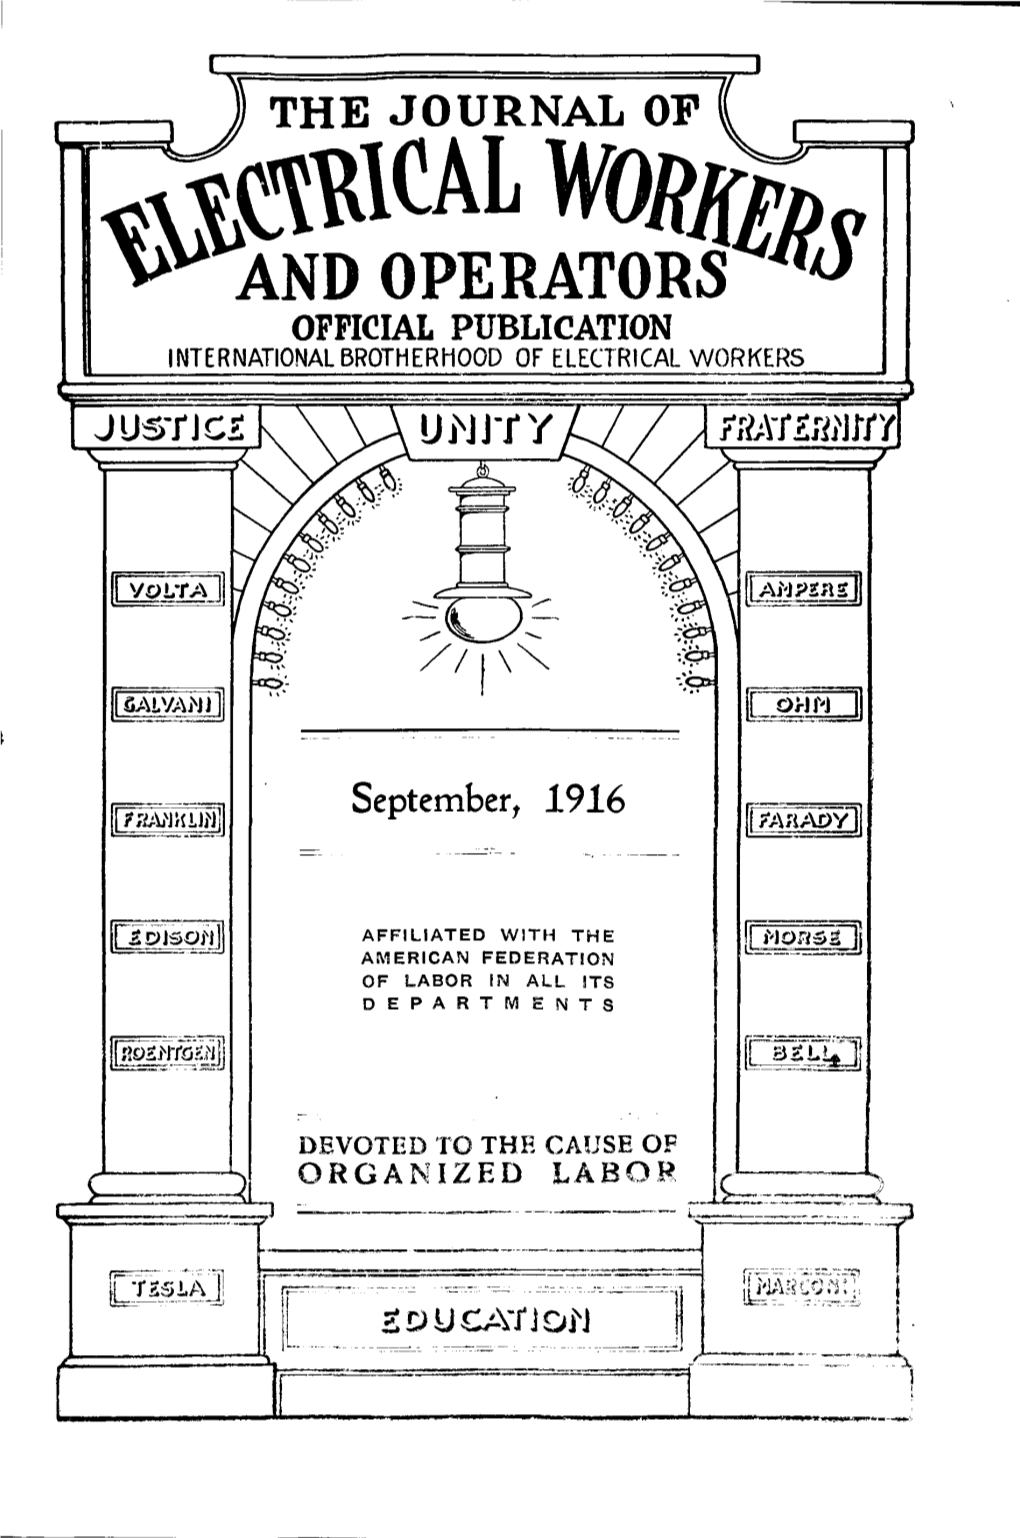 ~ Tt't\\\ CAL WORK!P ~V and OPERATORS Tis OFFICIAL PUBLICATION INTERNATIONAL BROTHERHOOD of ELECTRICAL WORKERS